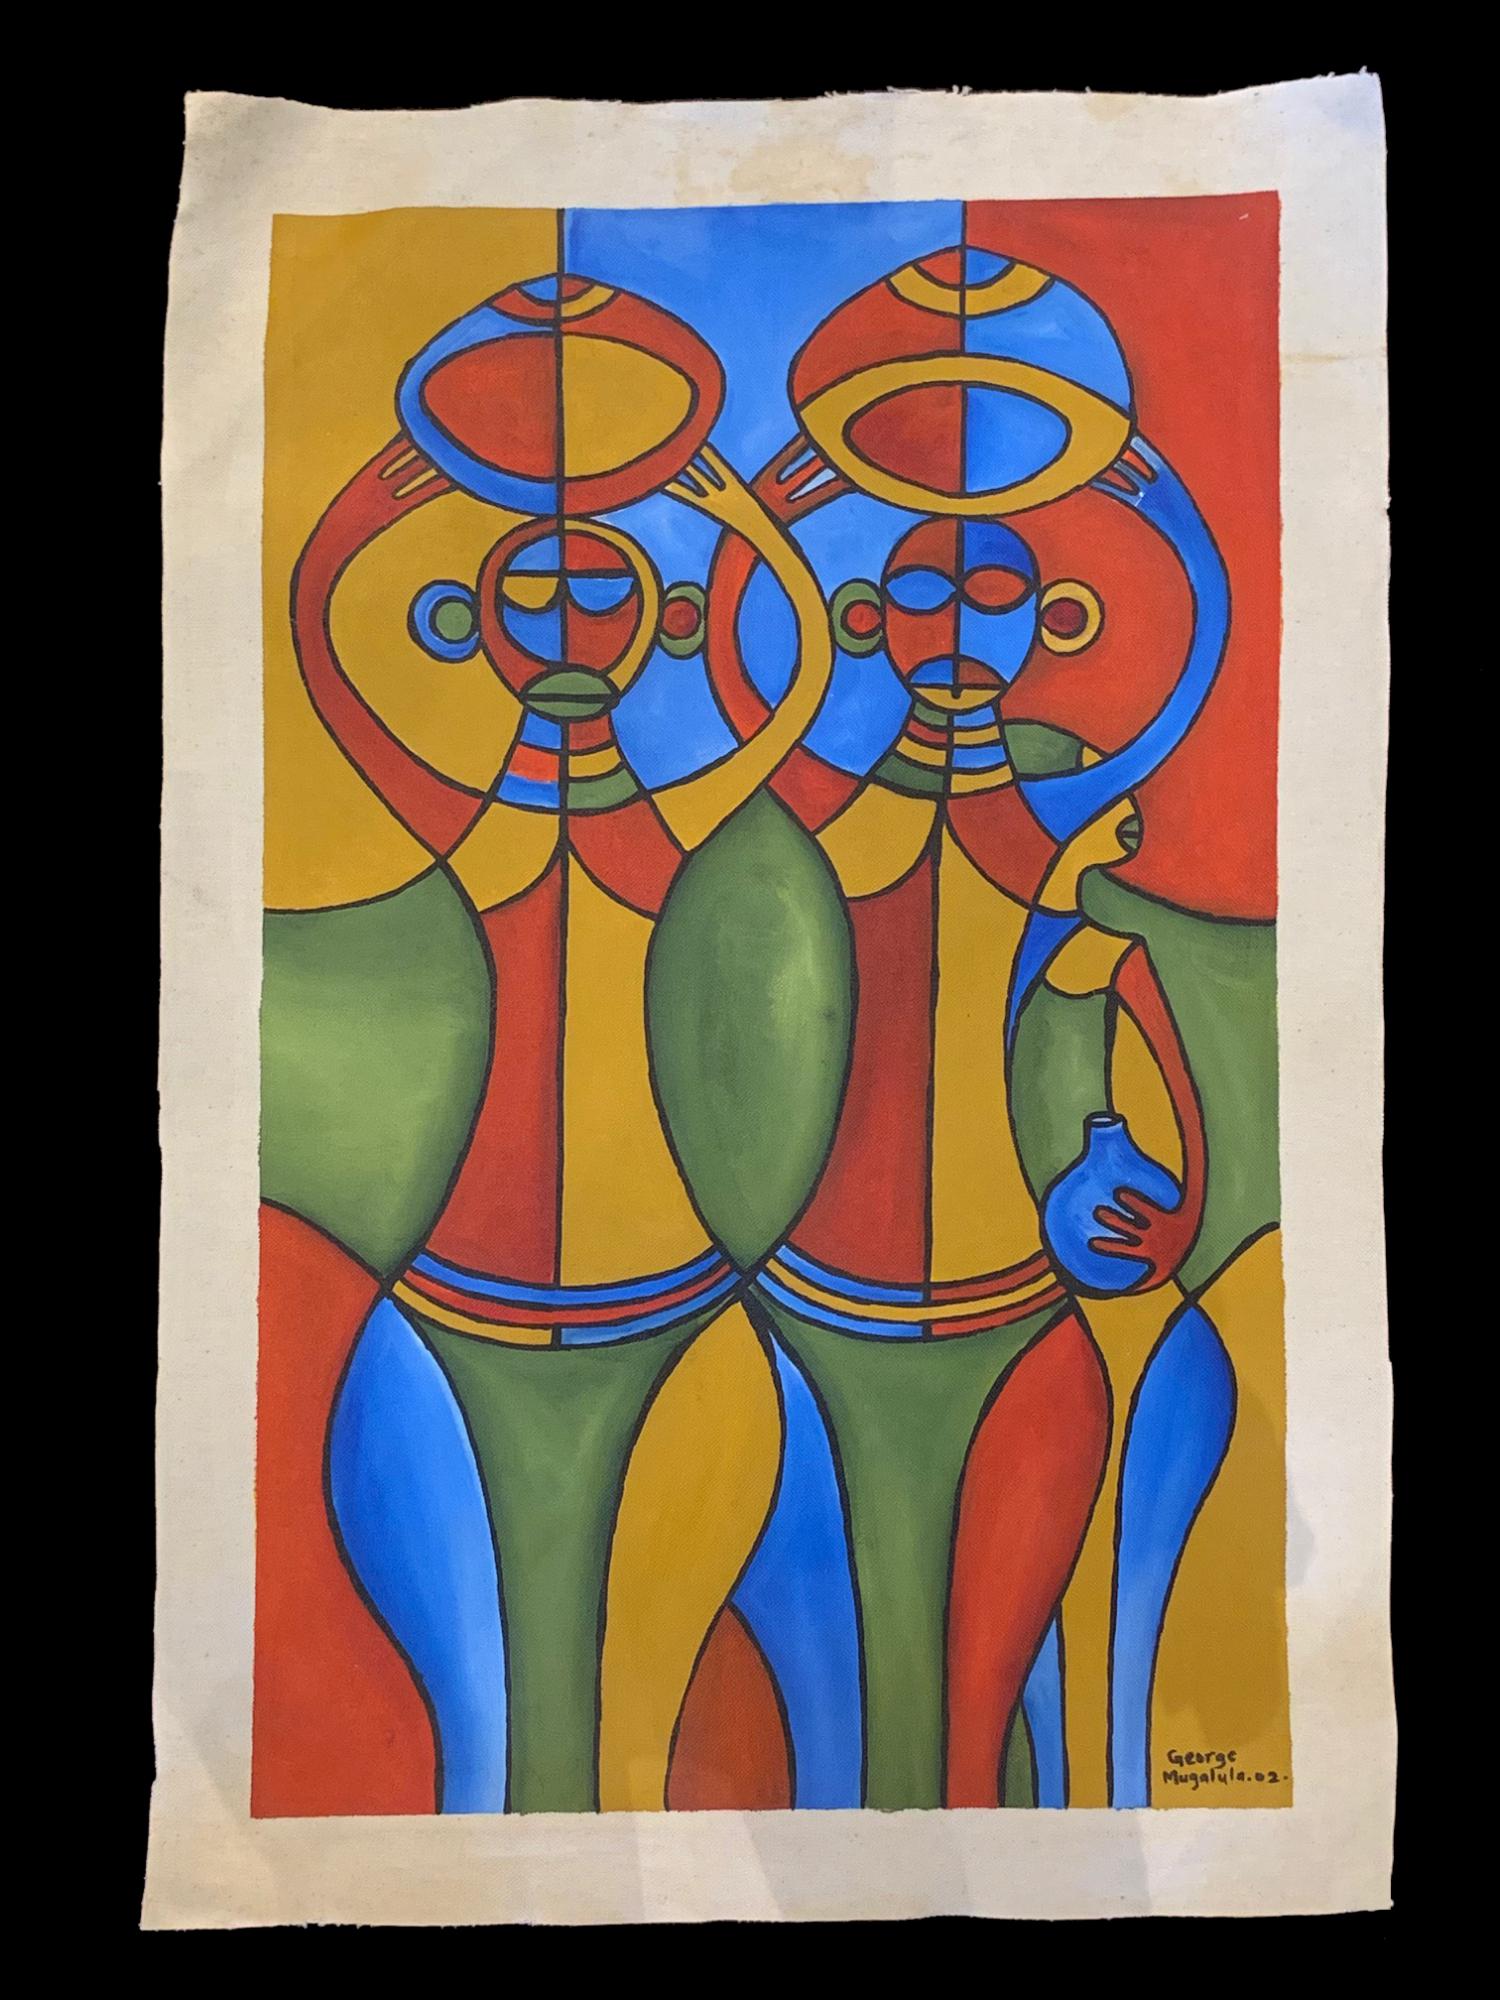 Carry That Weight - an original painting by Ugandan artist George Mugalula